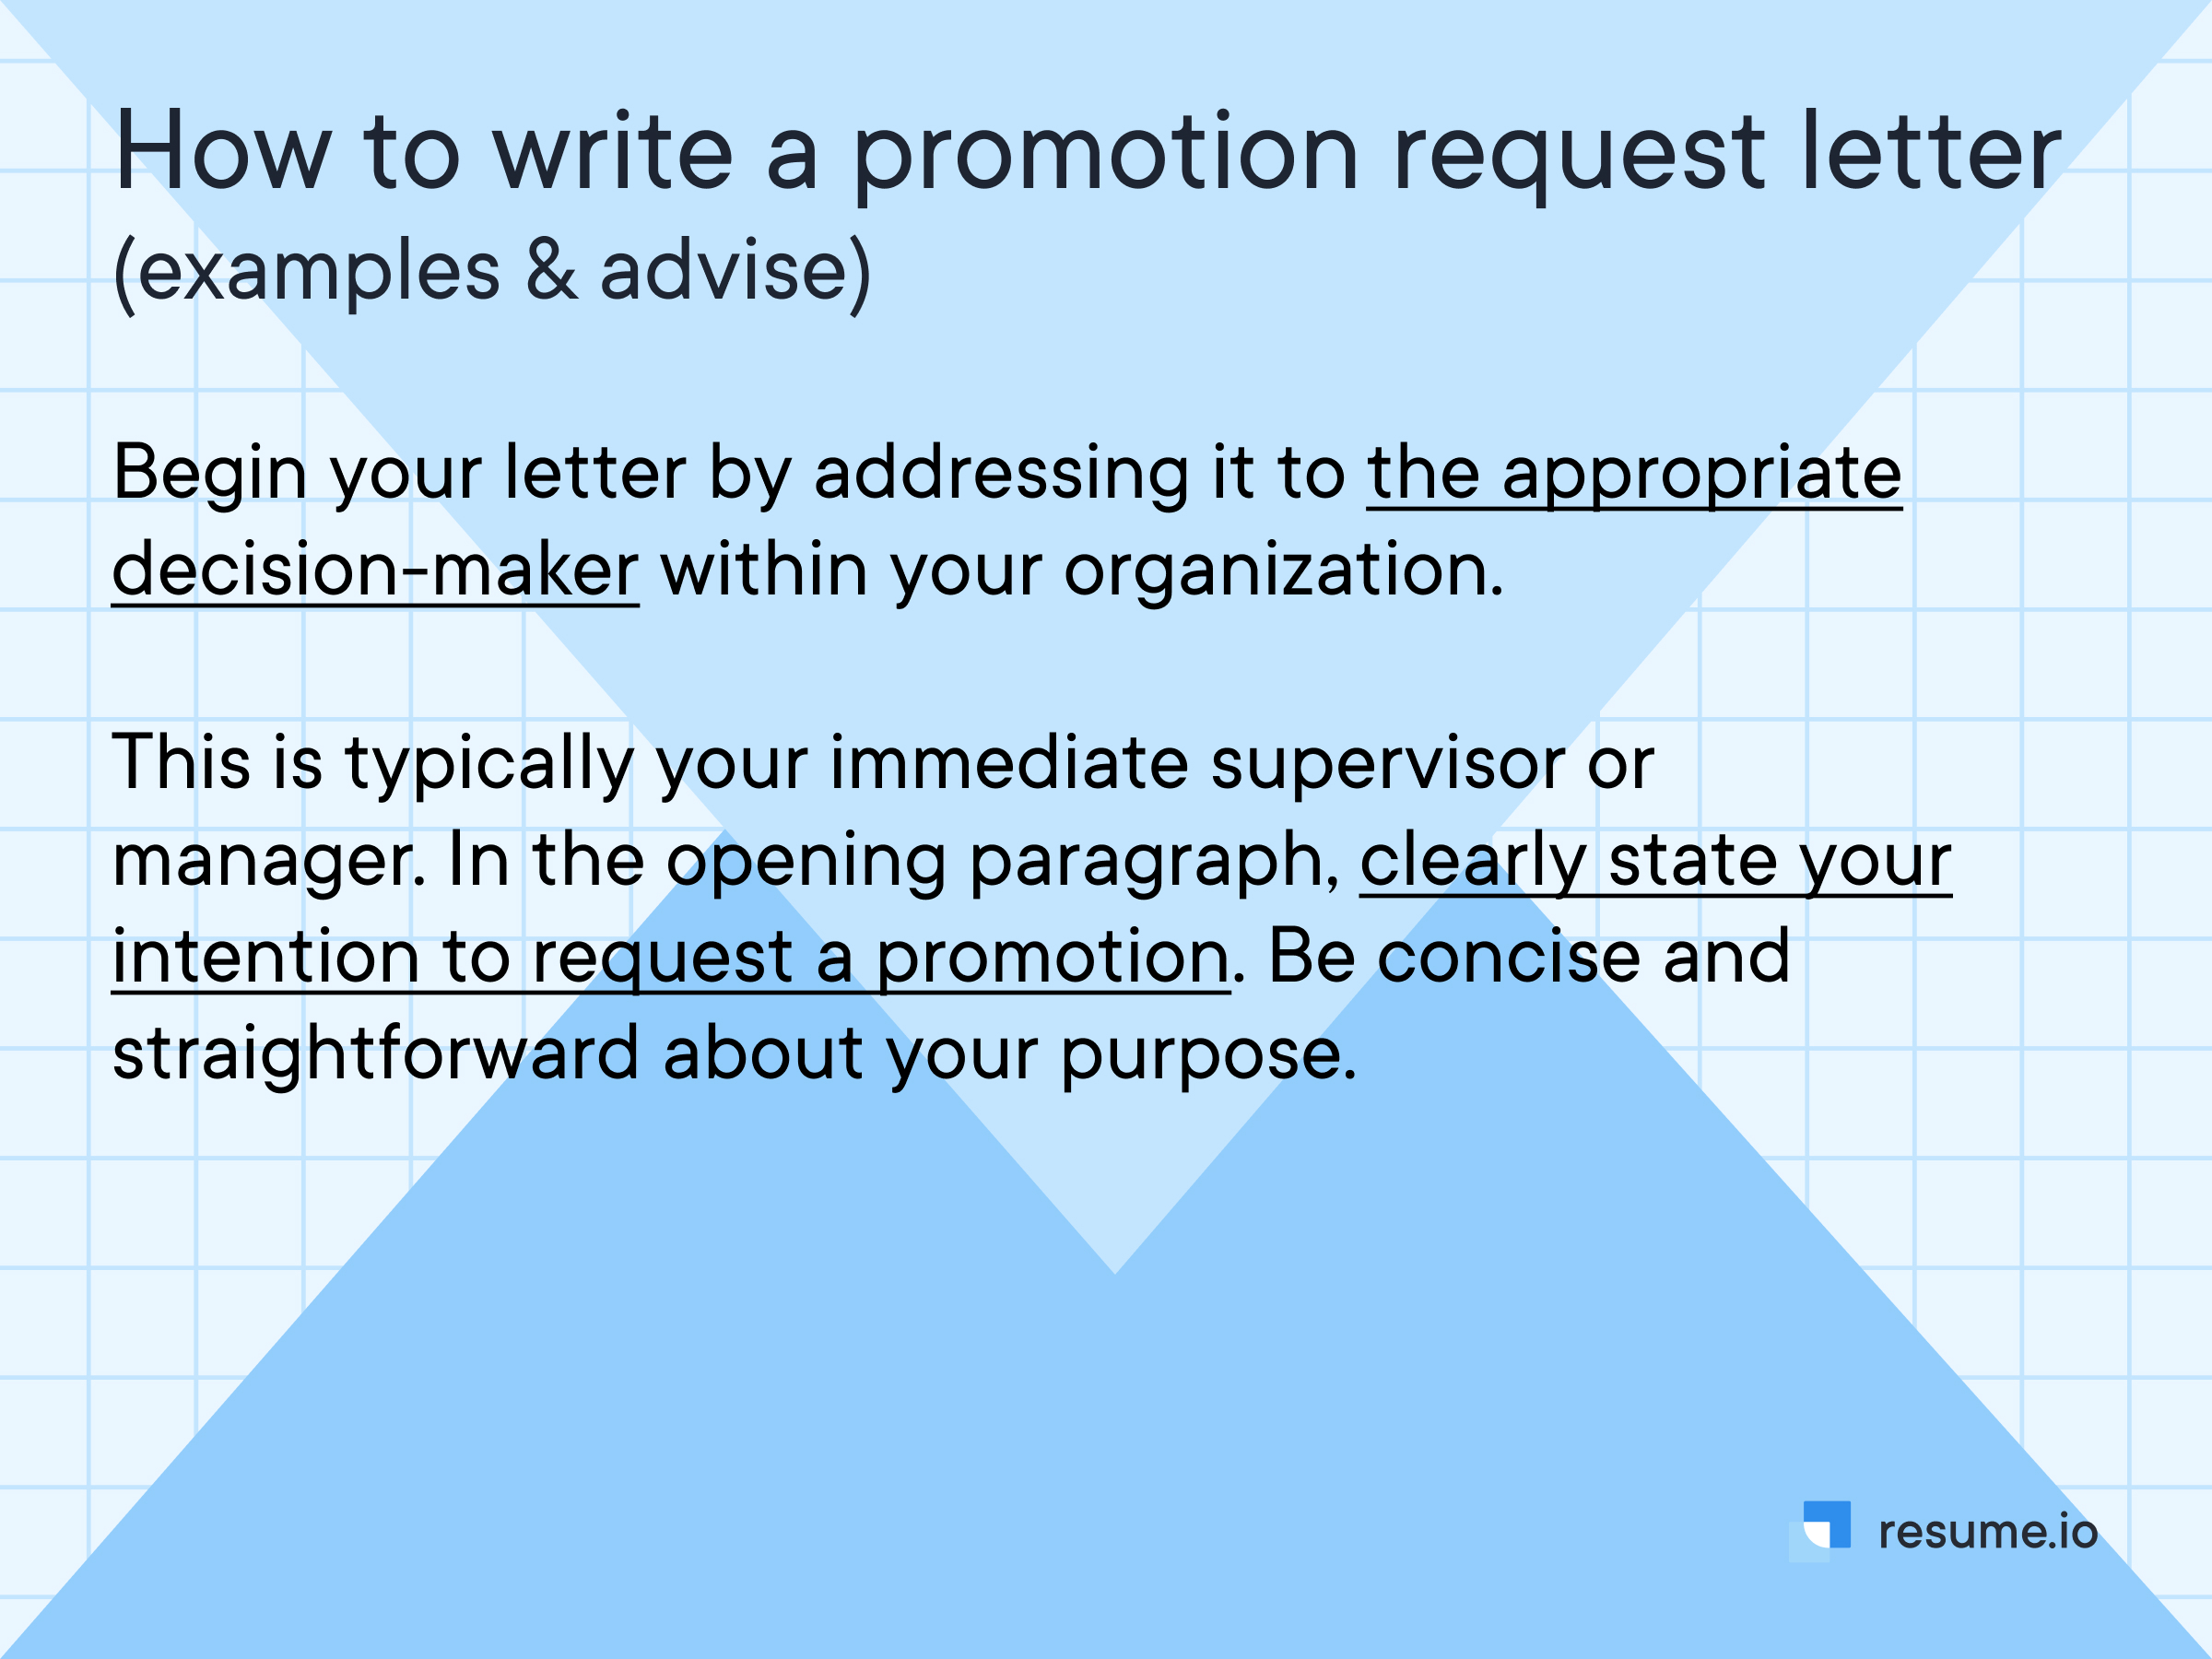 Address the promotion request letter to the appropriate decision-maker and state your intention to request a promotion